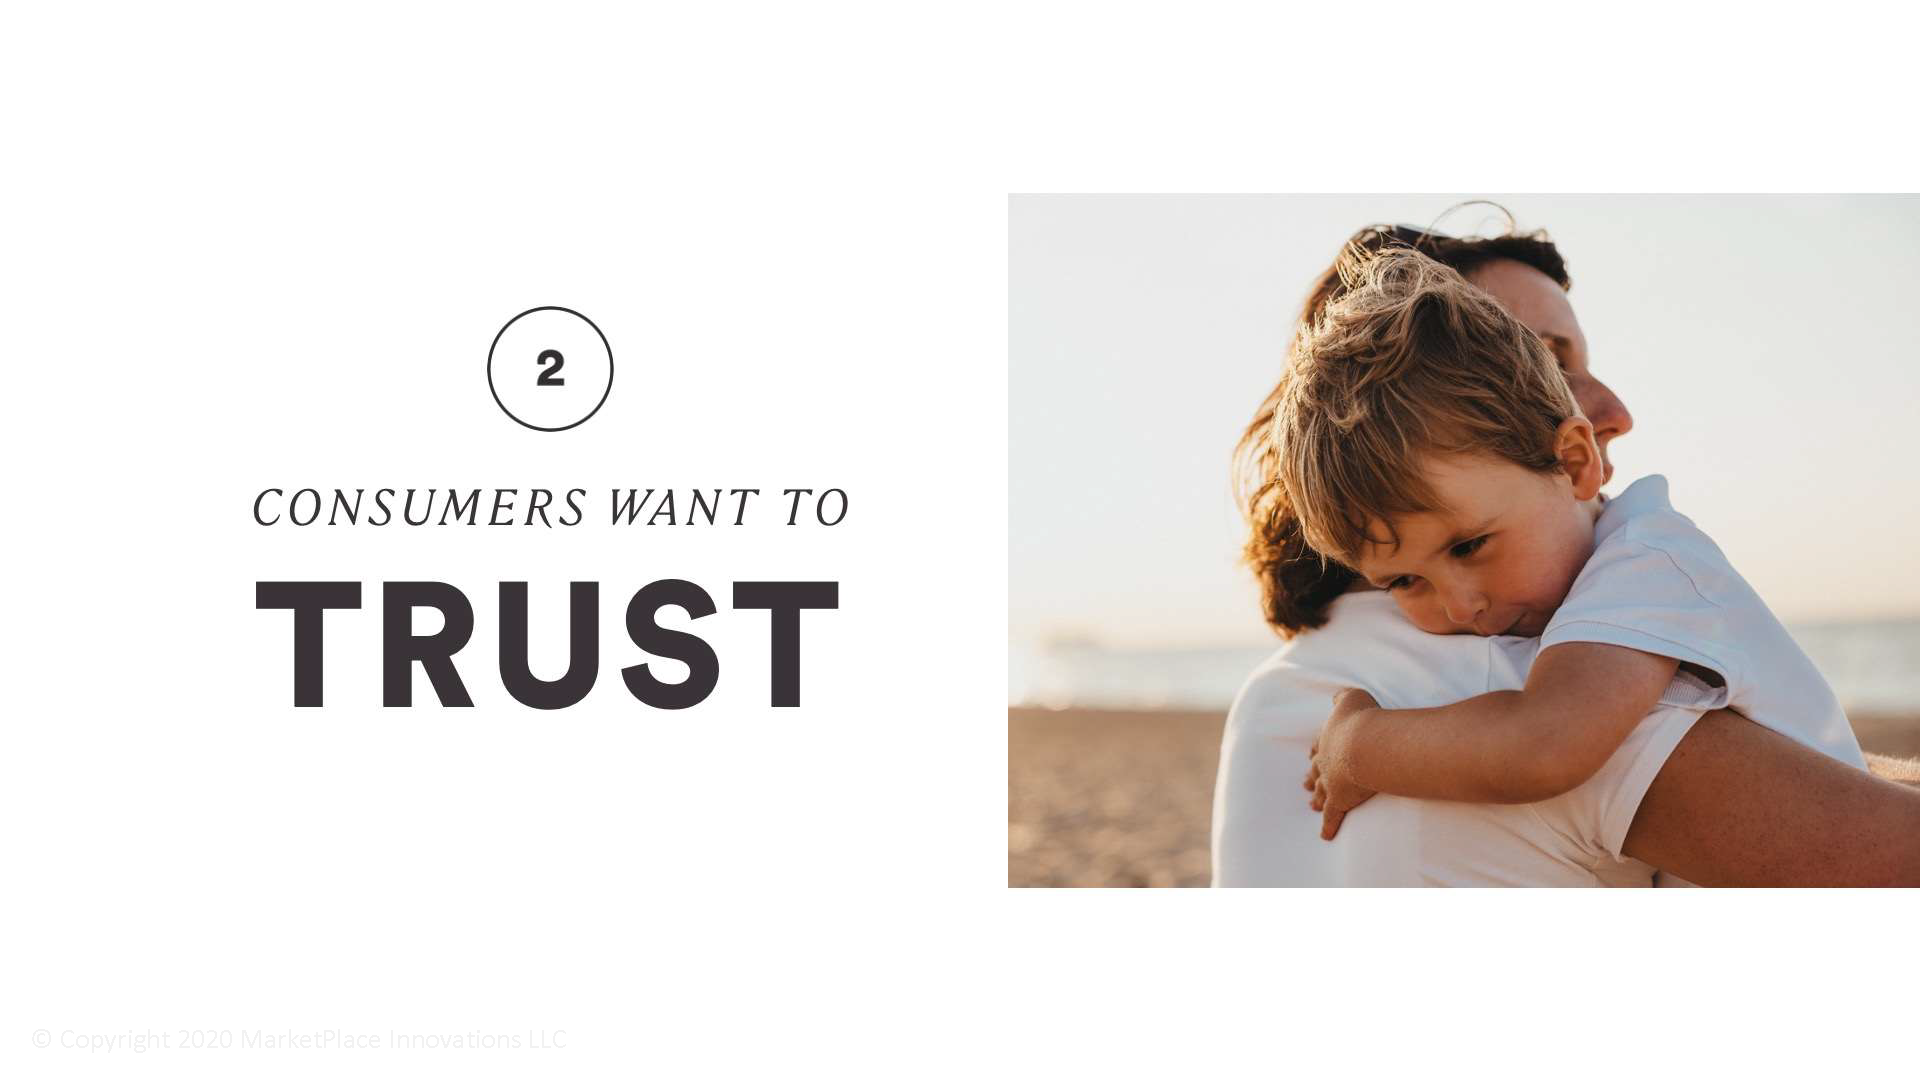 Consumers want to trust health and wellness